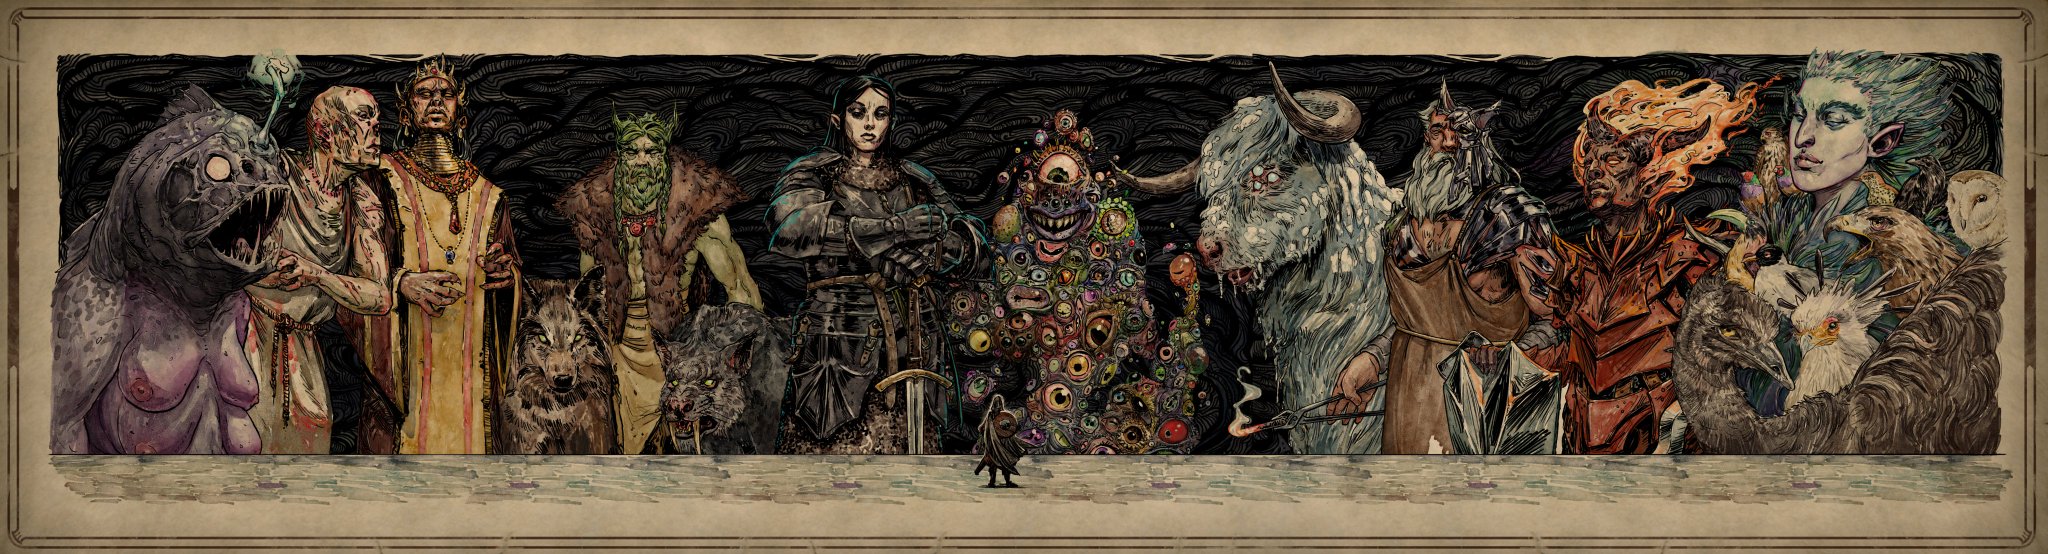 The player character in front of the deities of Eora. From the Pillars of Eternity games.